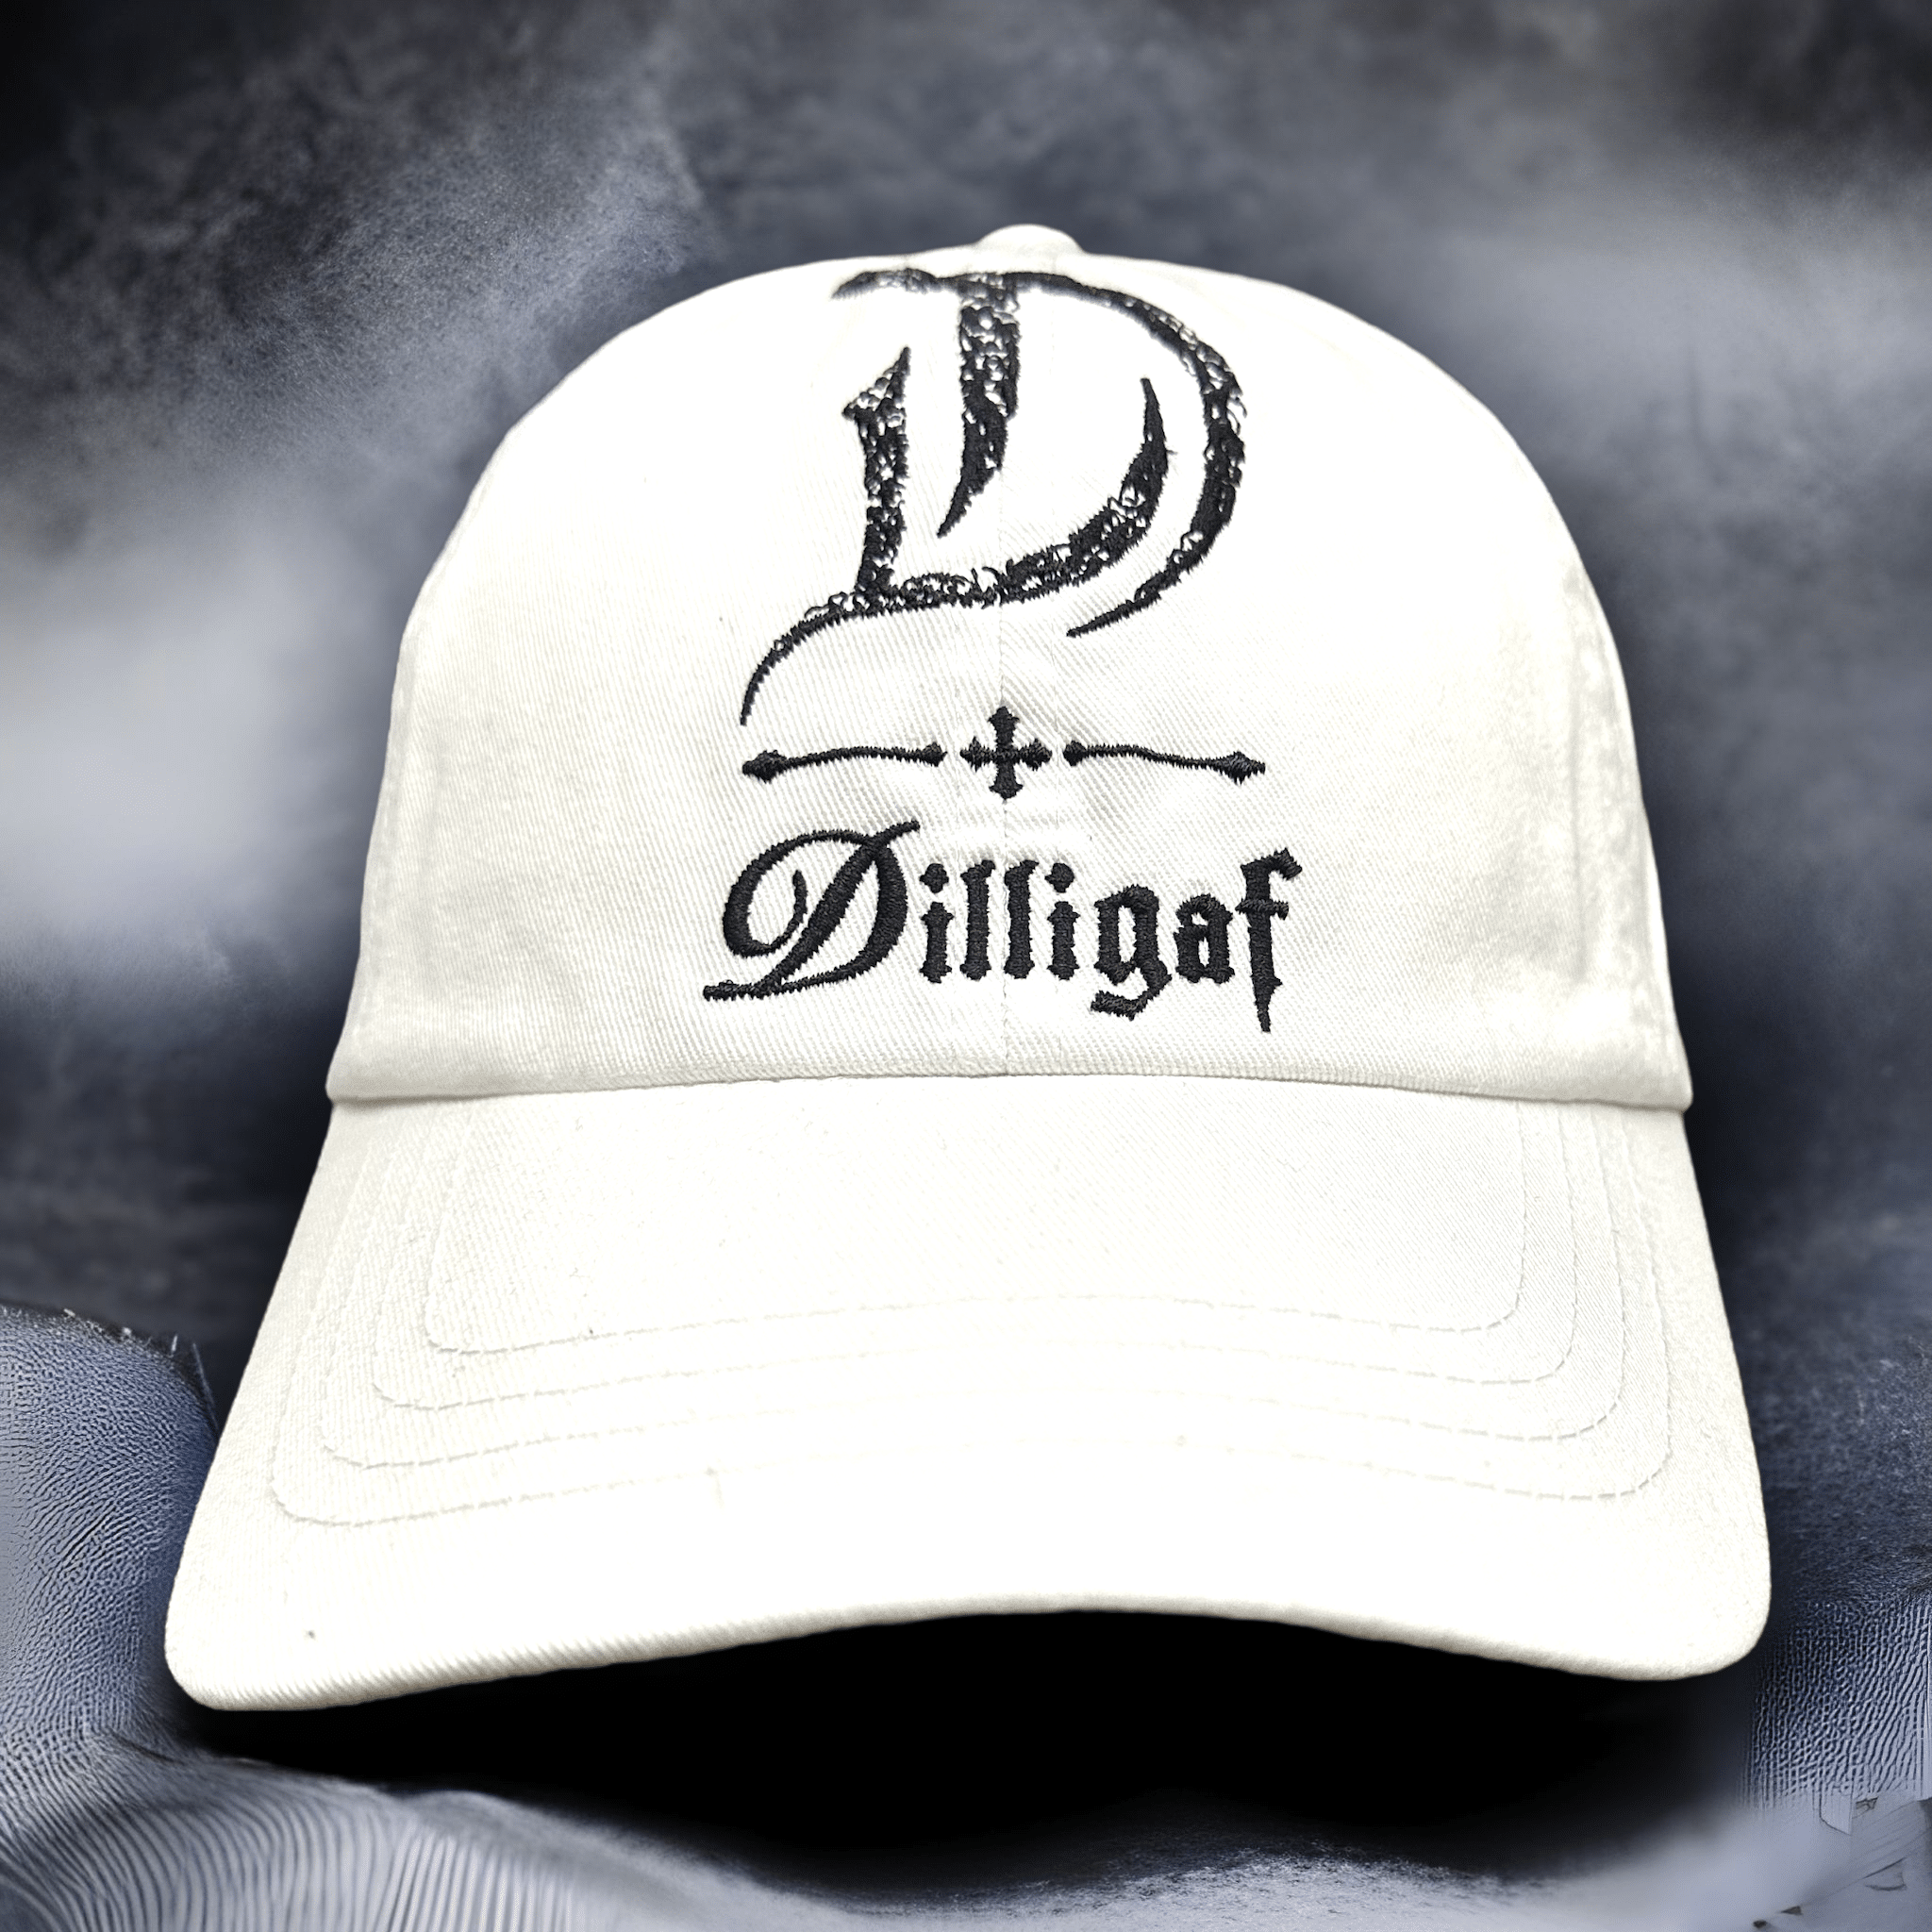 The Big D Hat/ White